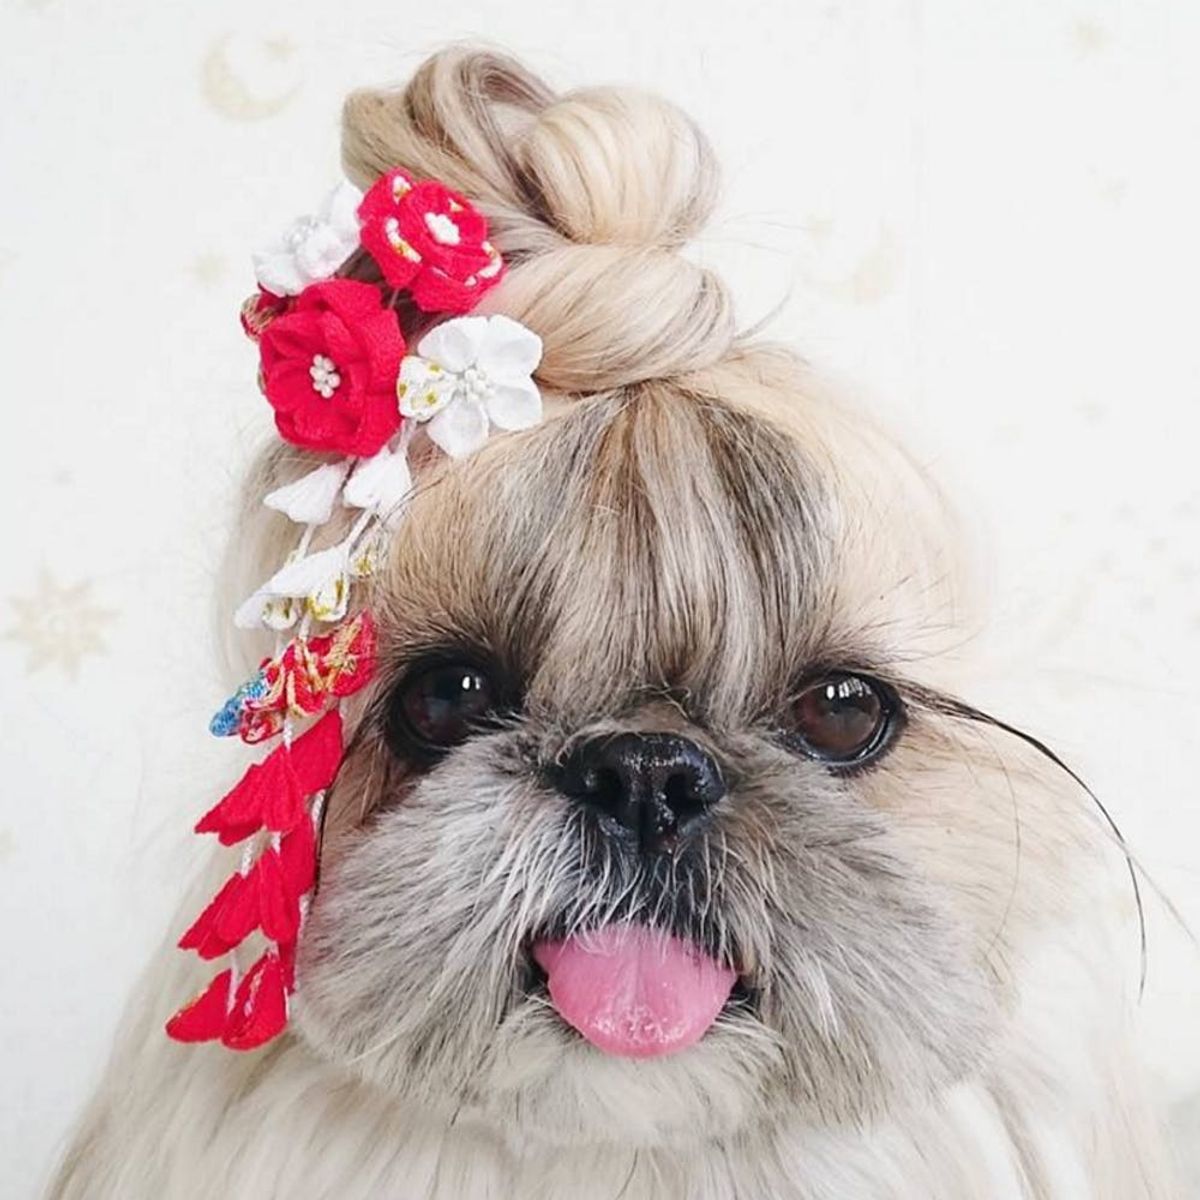 Kuma the Instagram Dog Is About to Become Your New Hair Muse